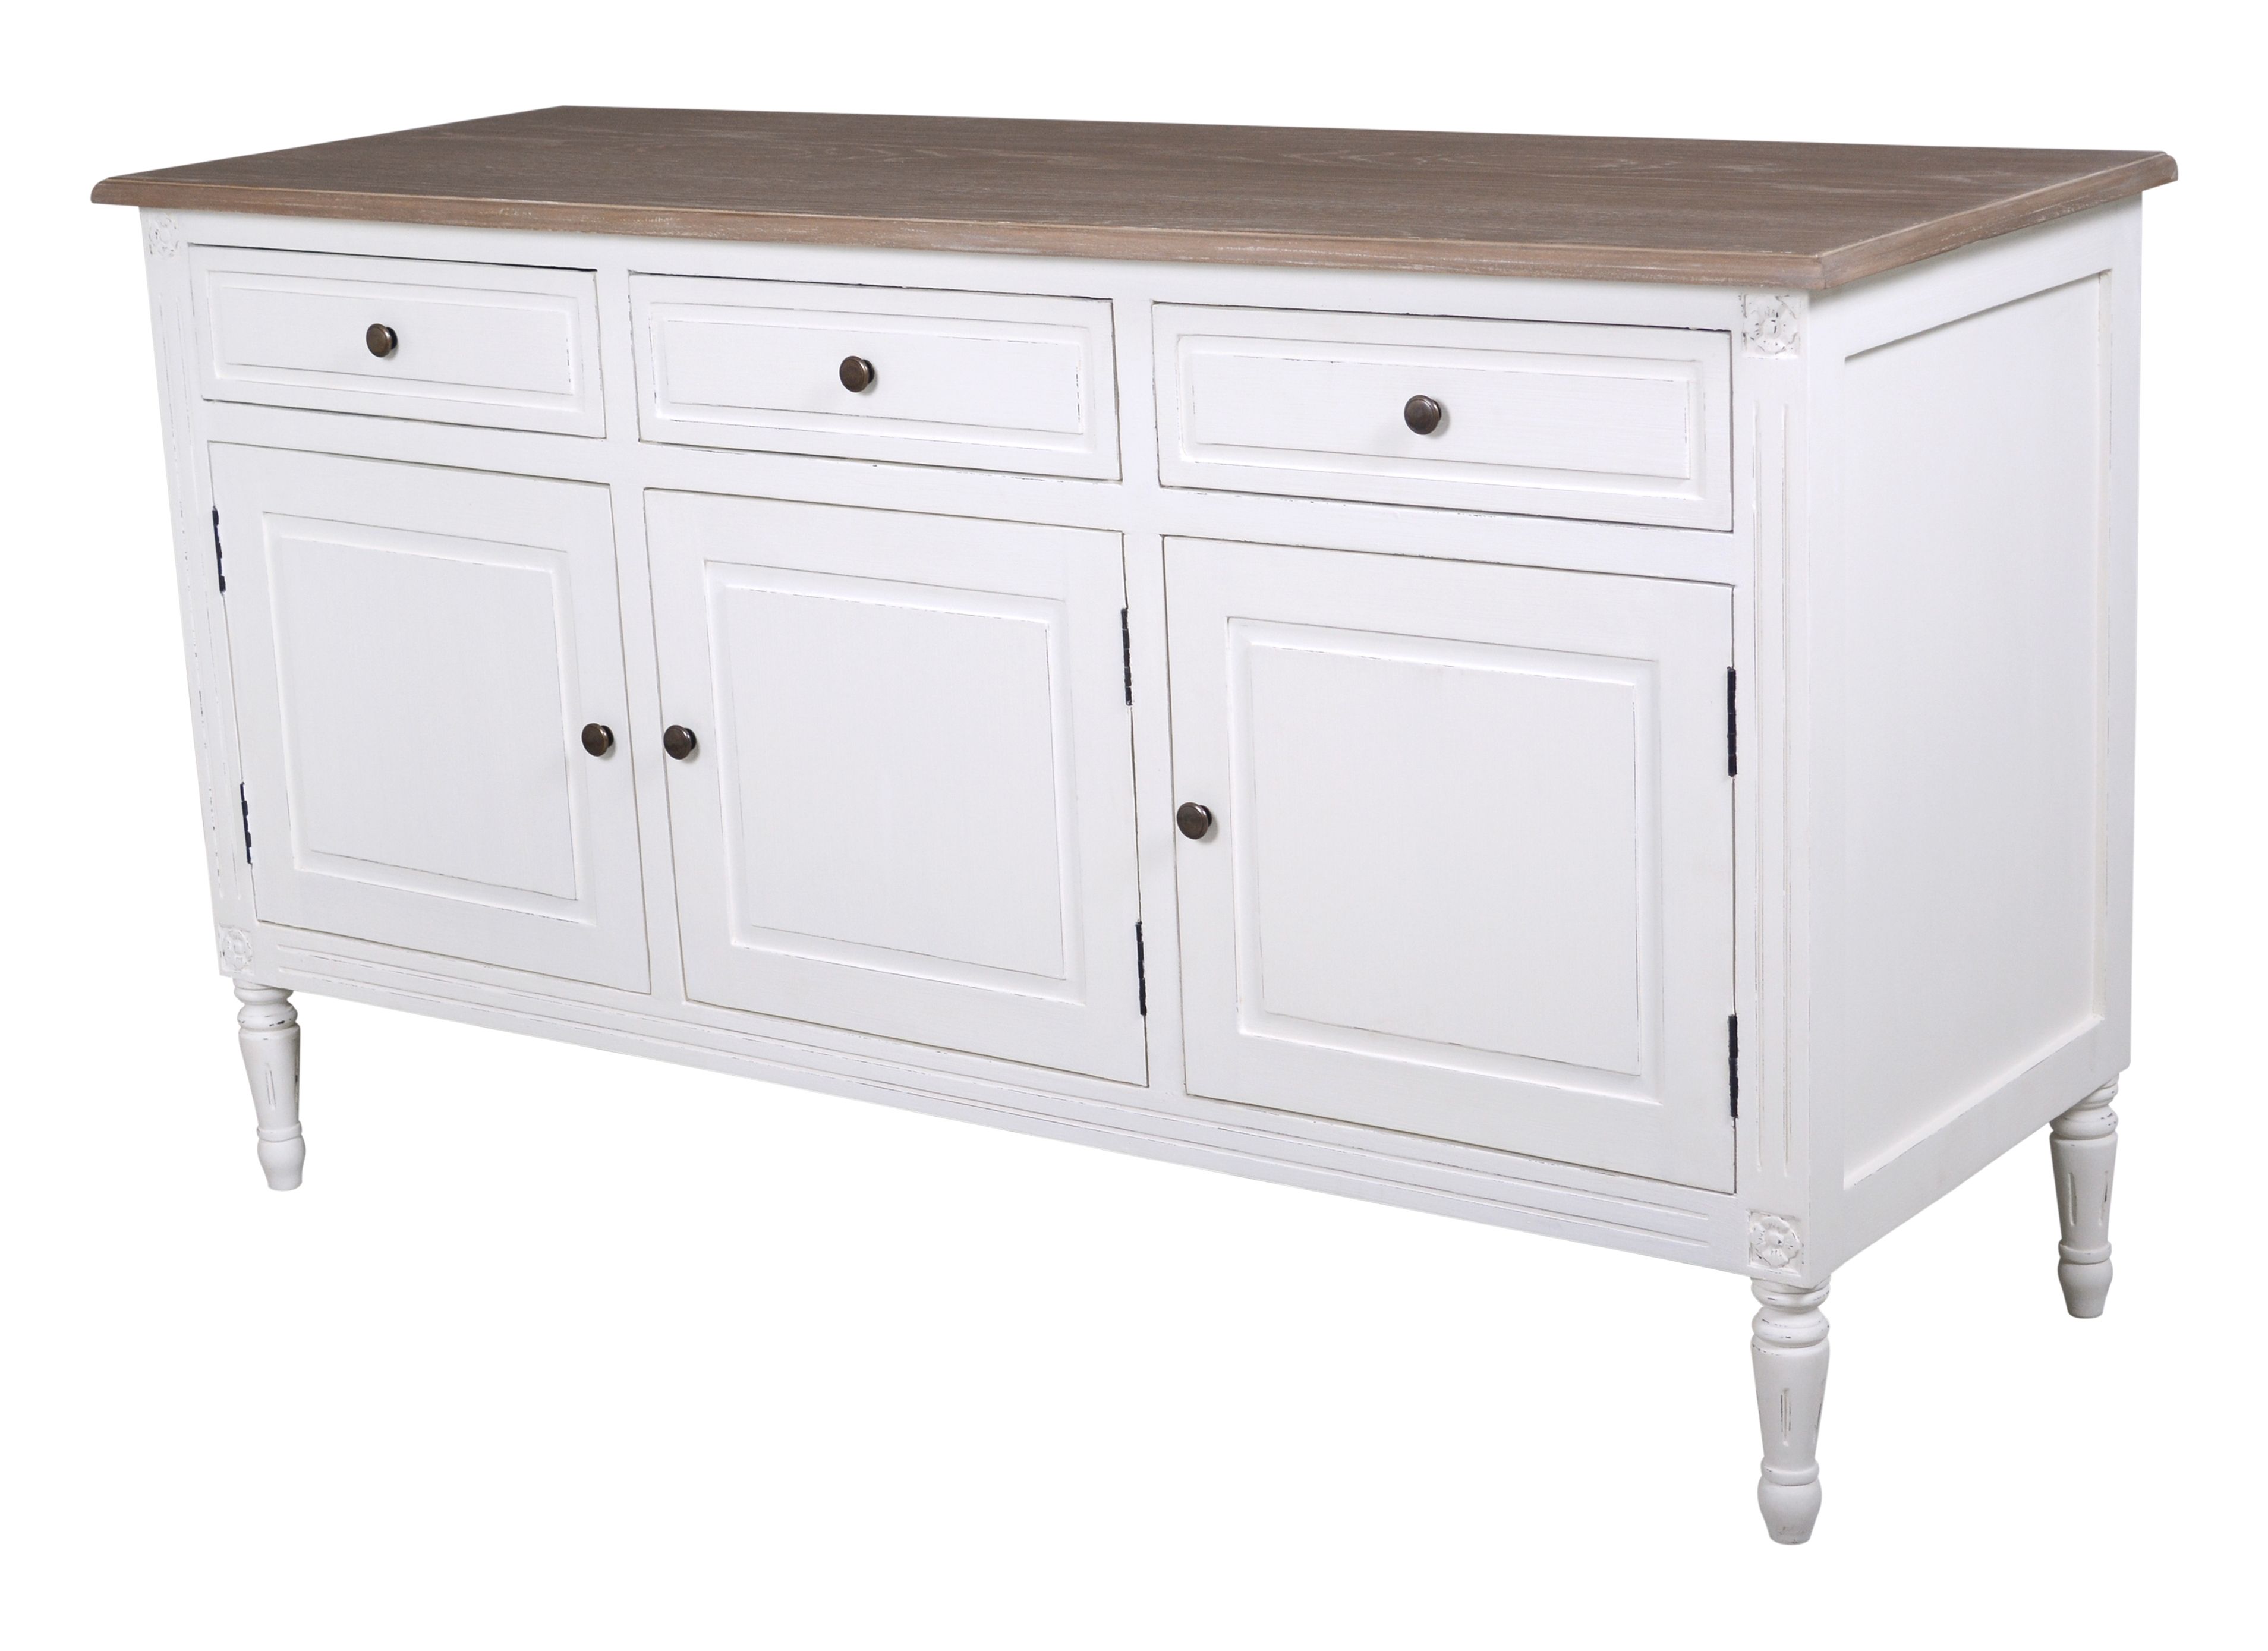 3 Drawer 3 Door Sideboard | Kelston House International Intended For Most Recently Released Antique White Distressed 3 Drawer/2 Door Sideboards (Photo 7 of 20)